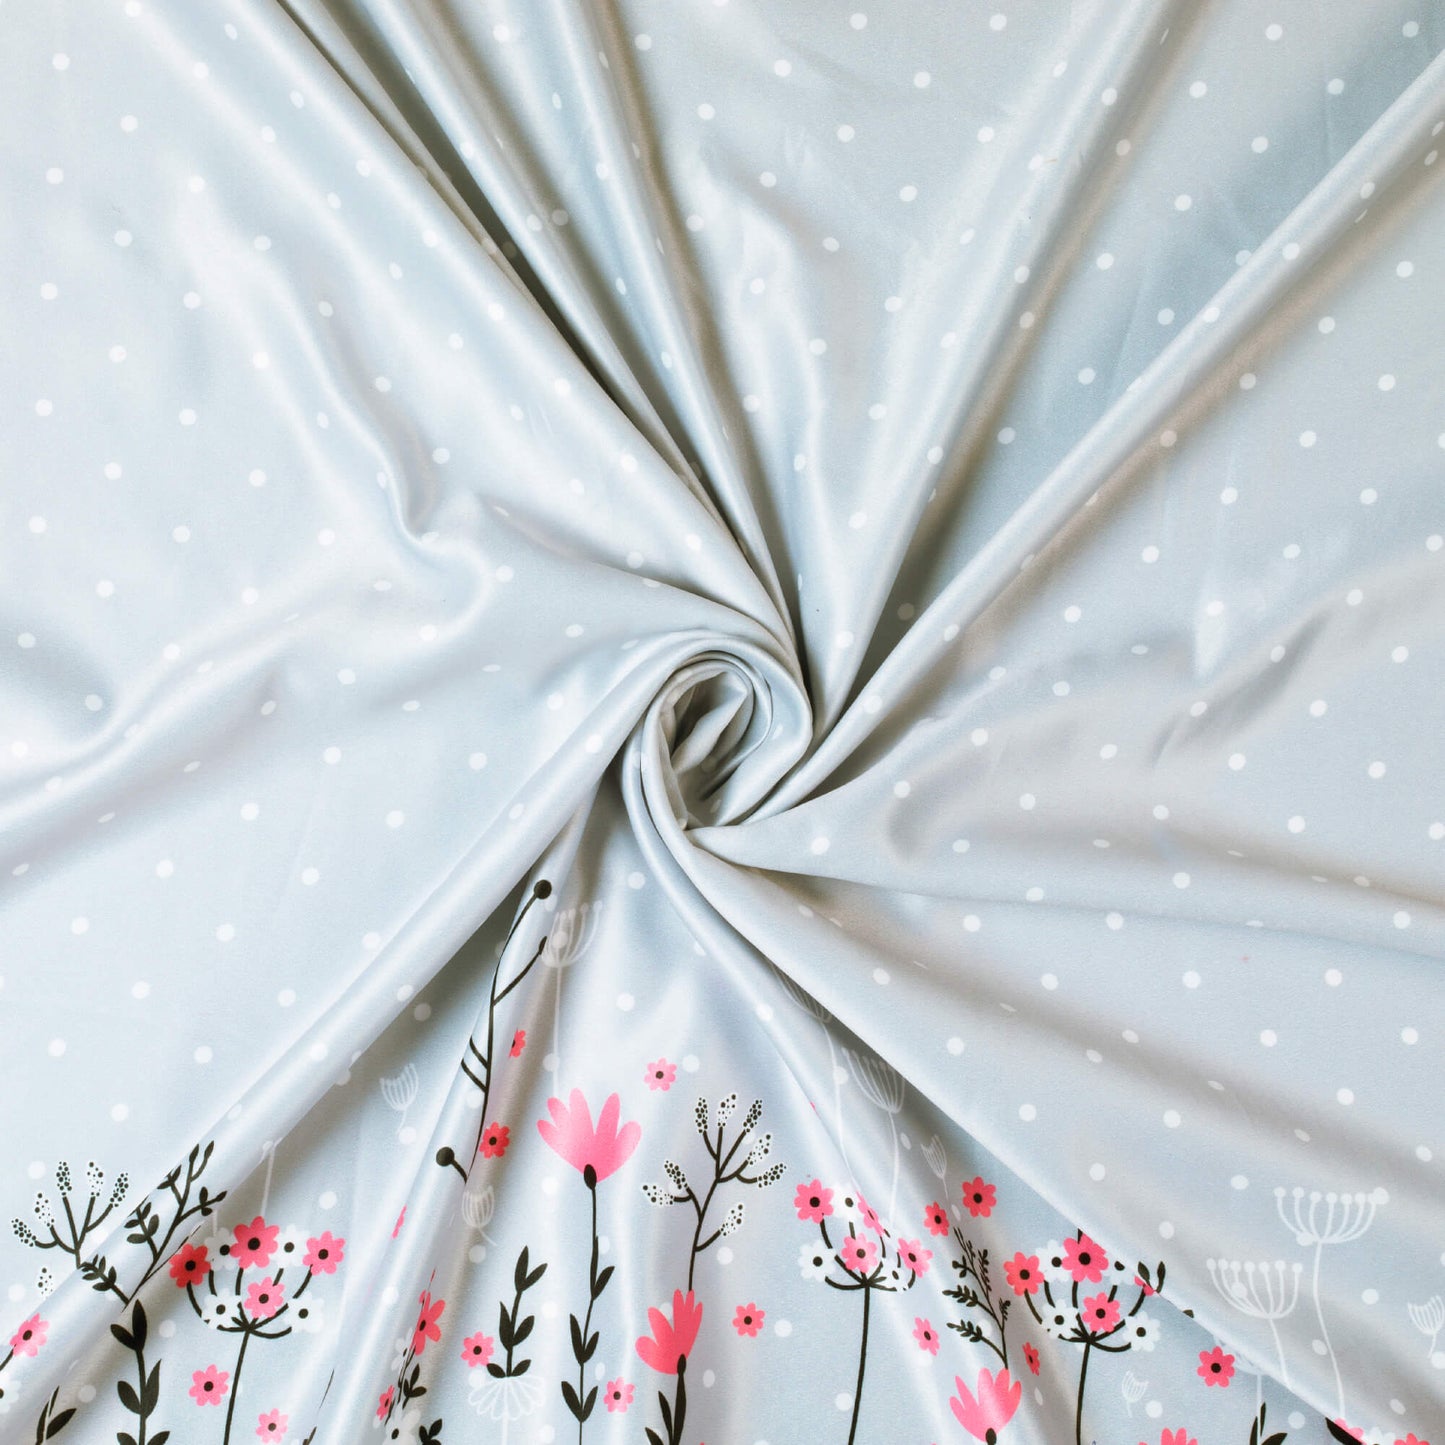 Pewter Grey And Peach Polka Dots Pattern Digital Print Heavy Satin Fabric (Width 58 Inches)